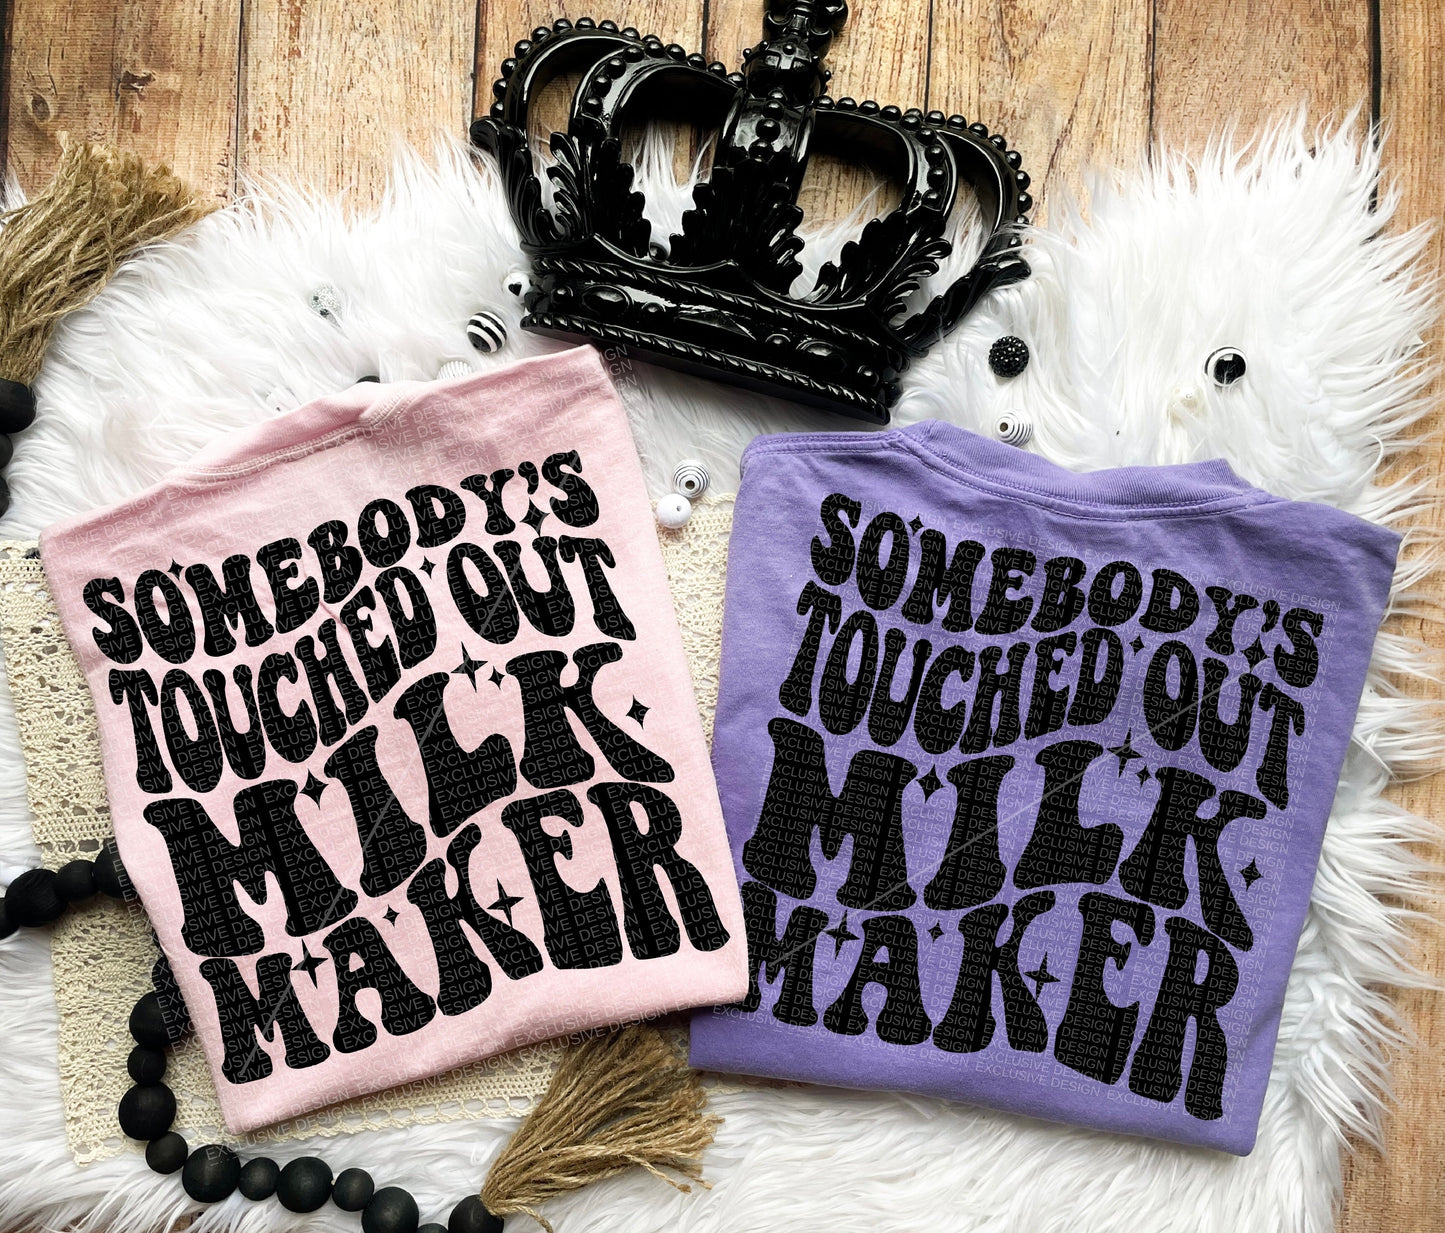 Touched Out Milk Maker Comfort Colors Tshirt